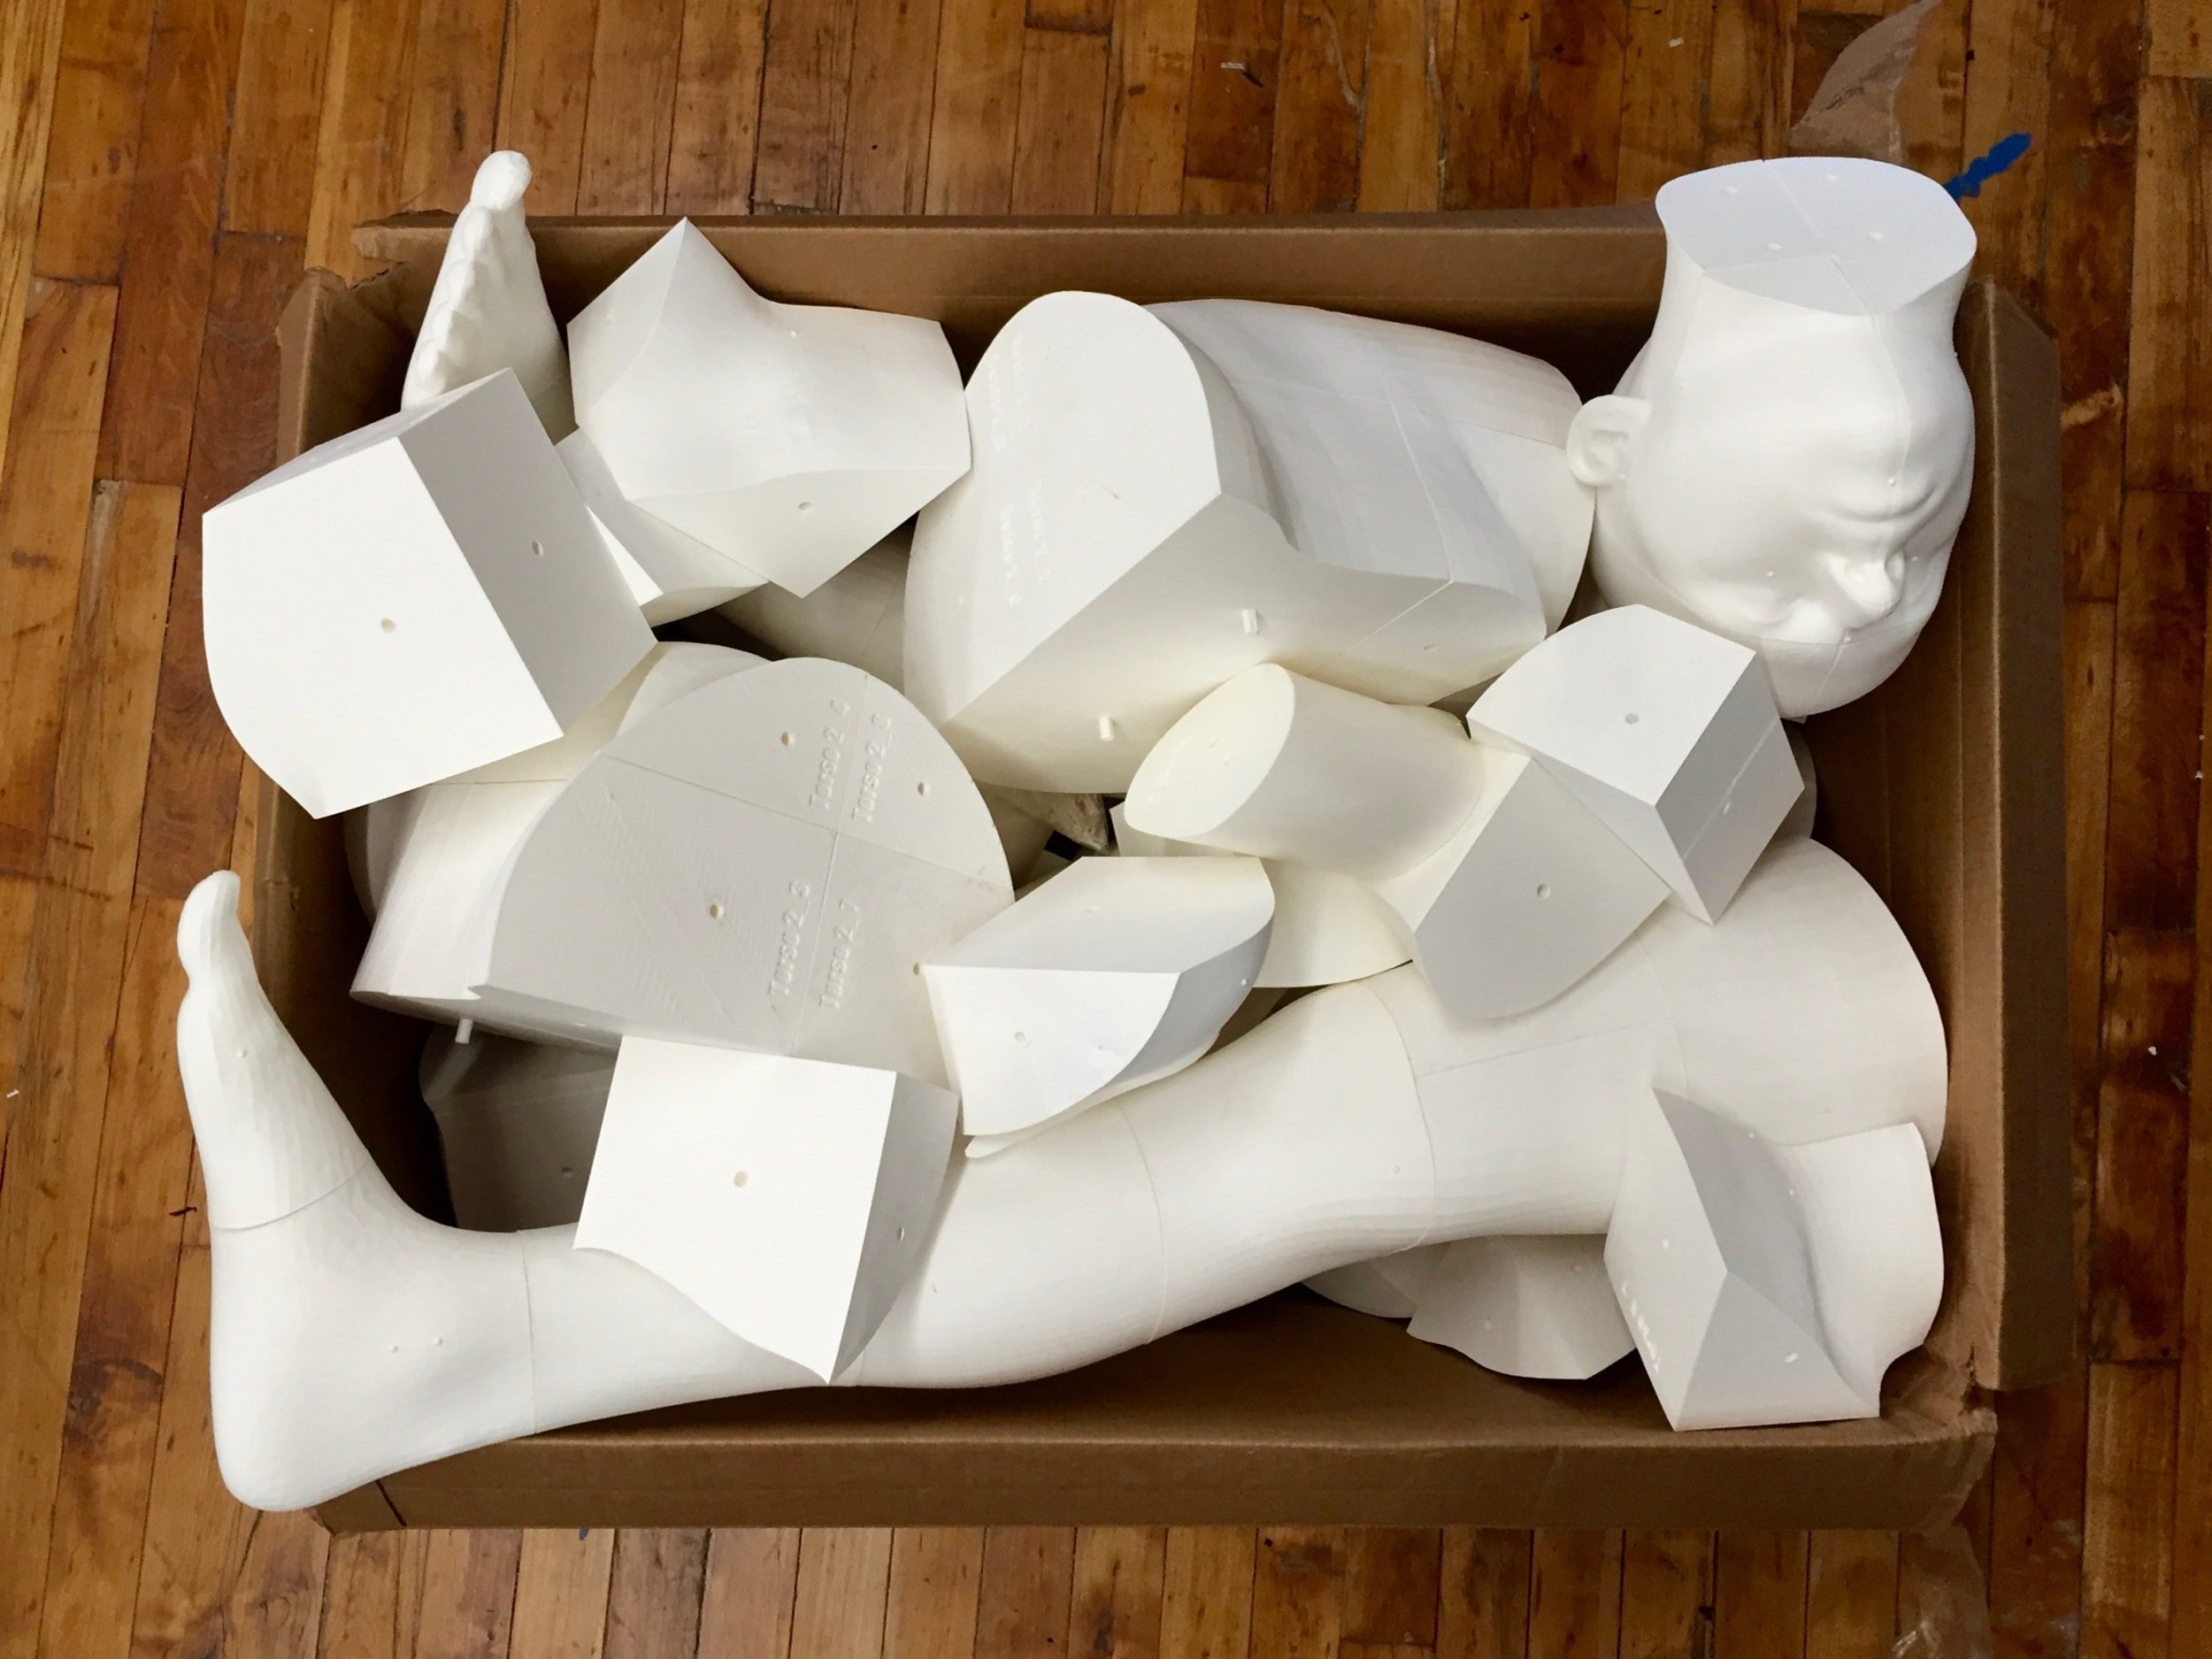  A collection of unassembled 3D printed body components 